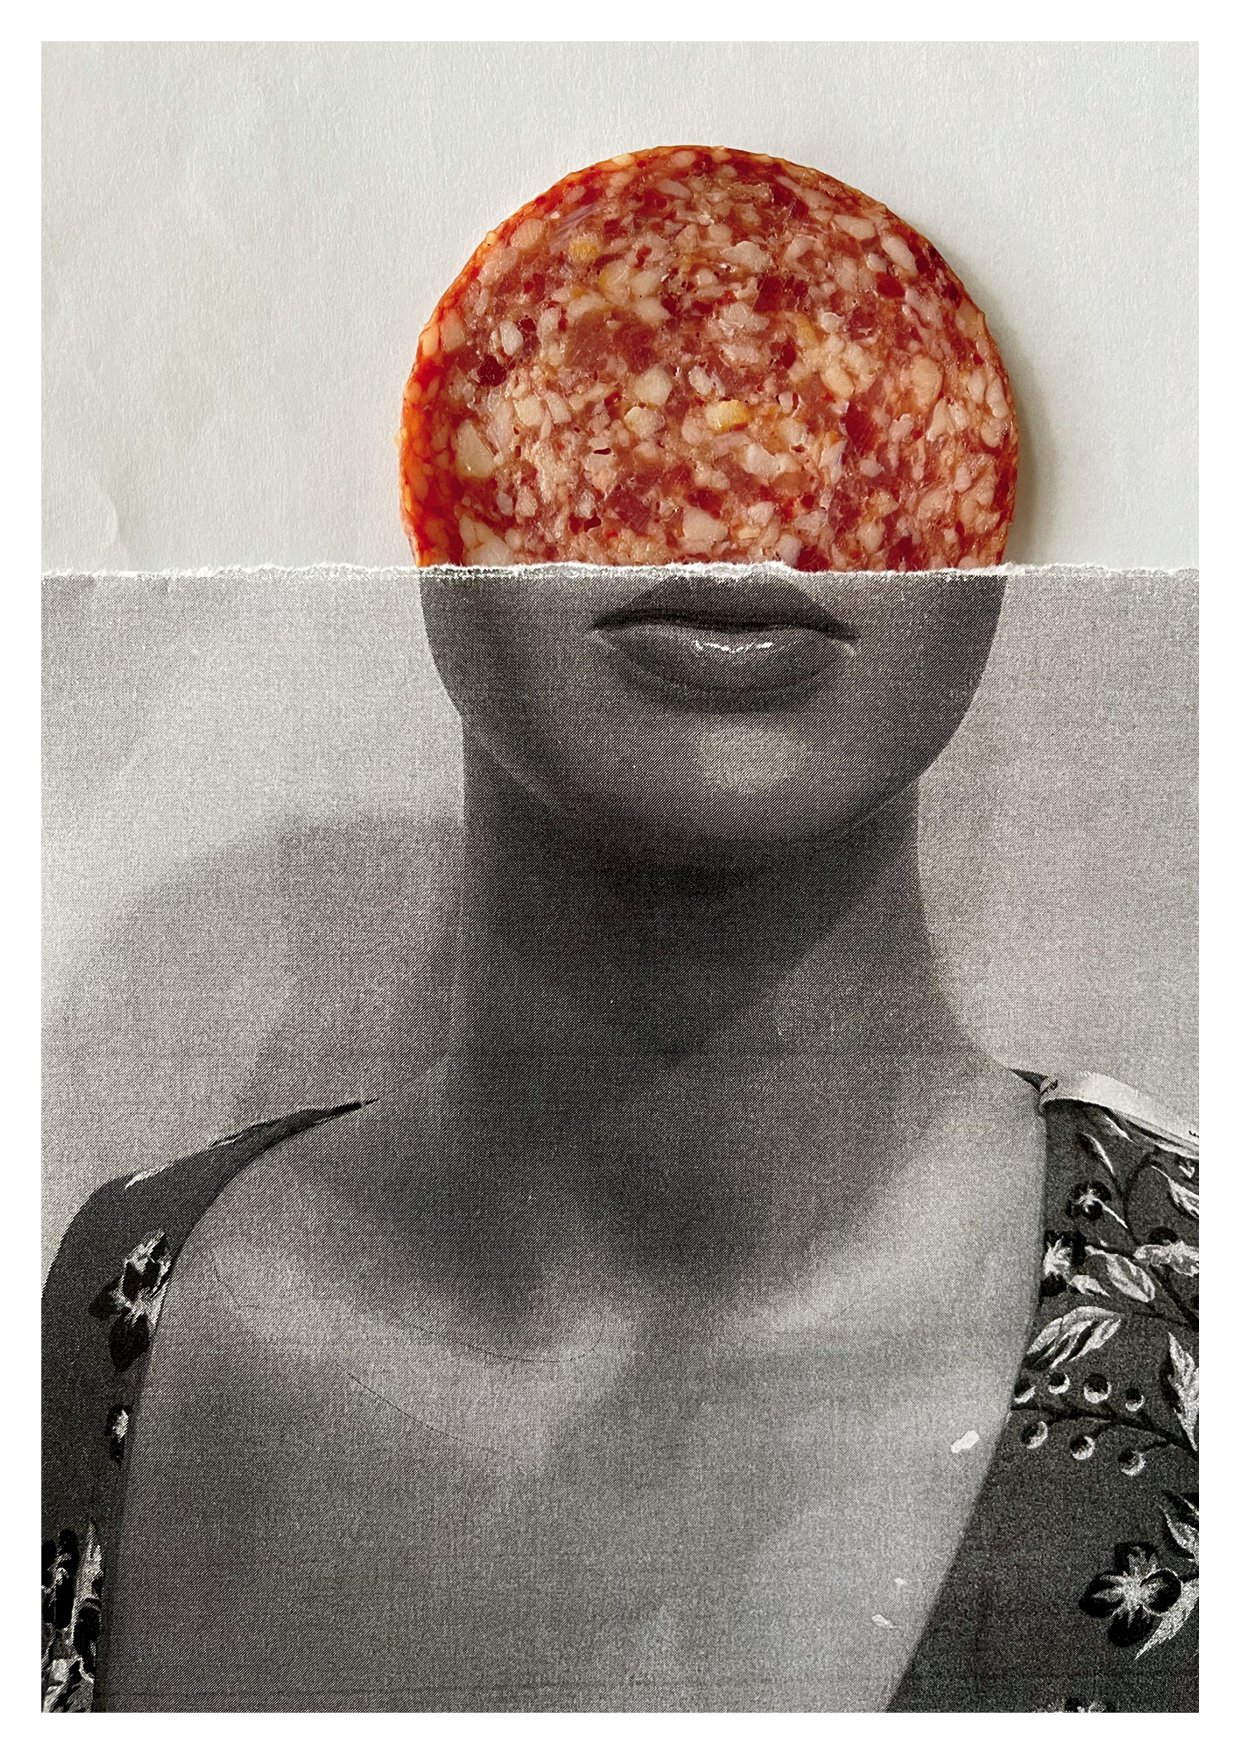 Collage on the Run #26